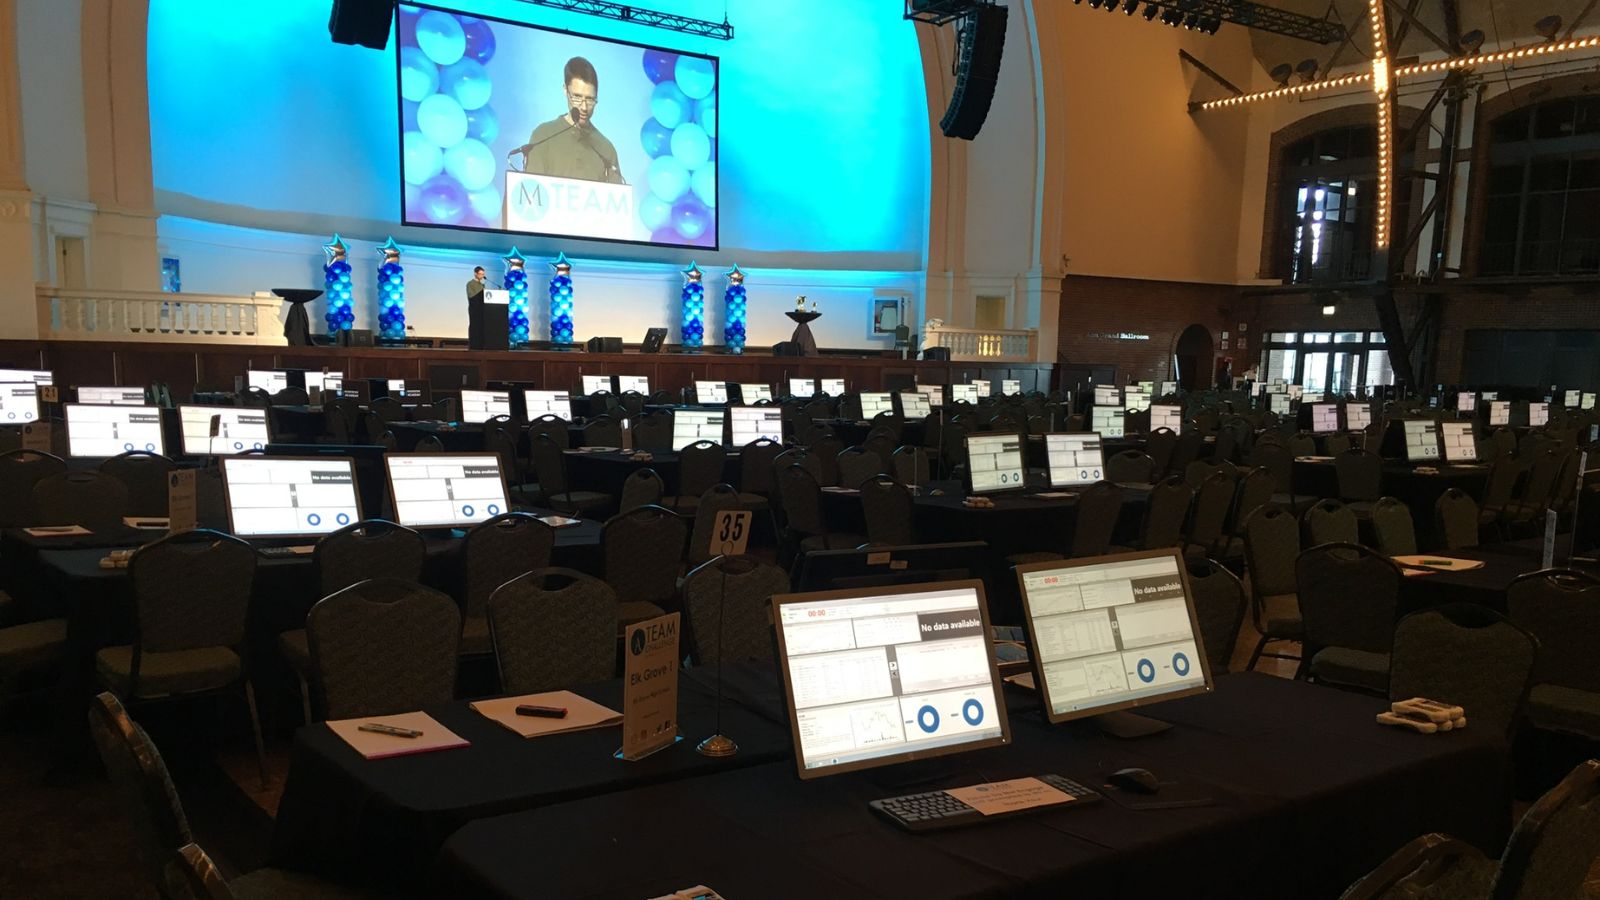 Room at the Chicago stock exchange filled with laptops and balloons on a stage